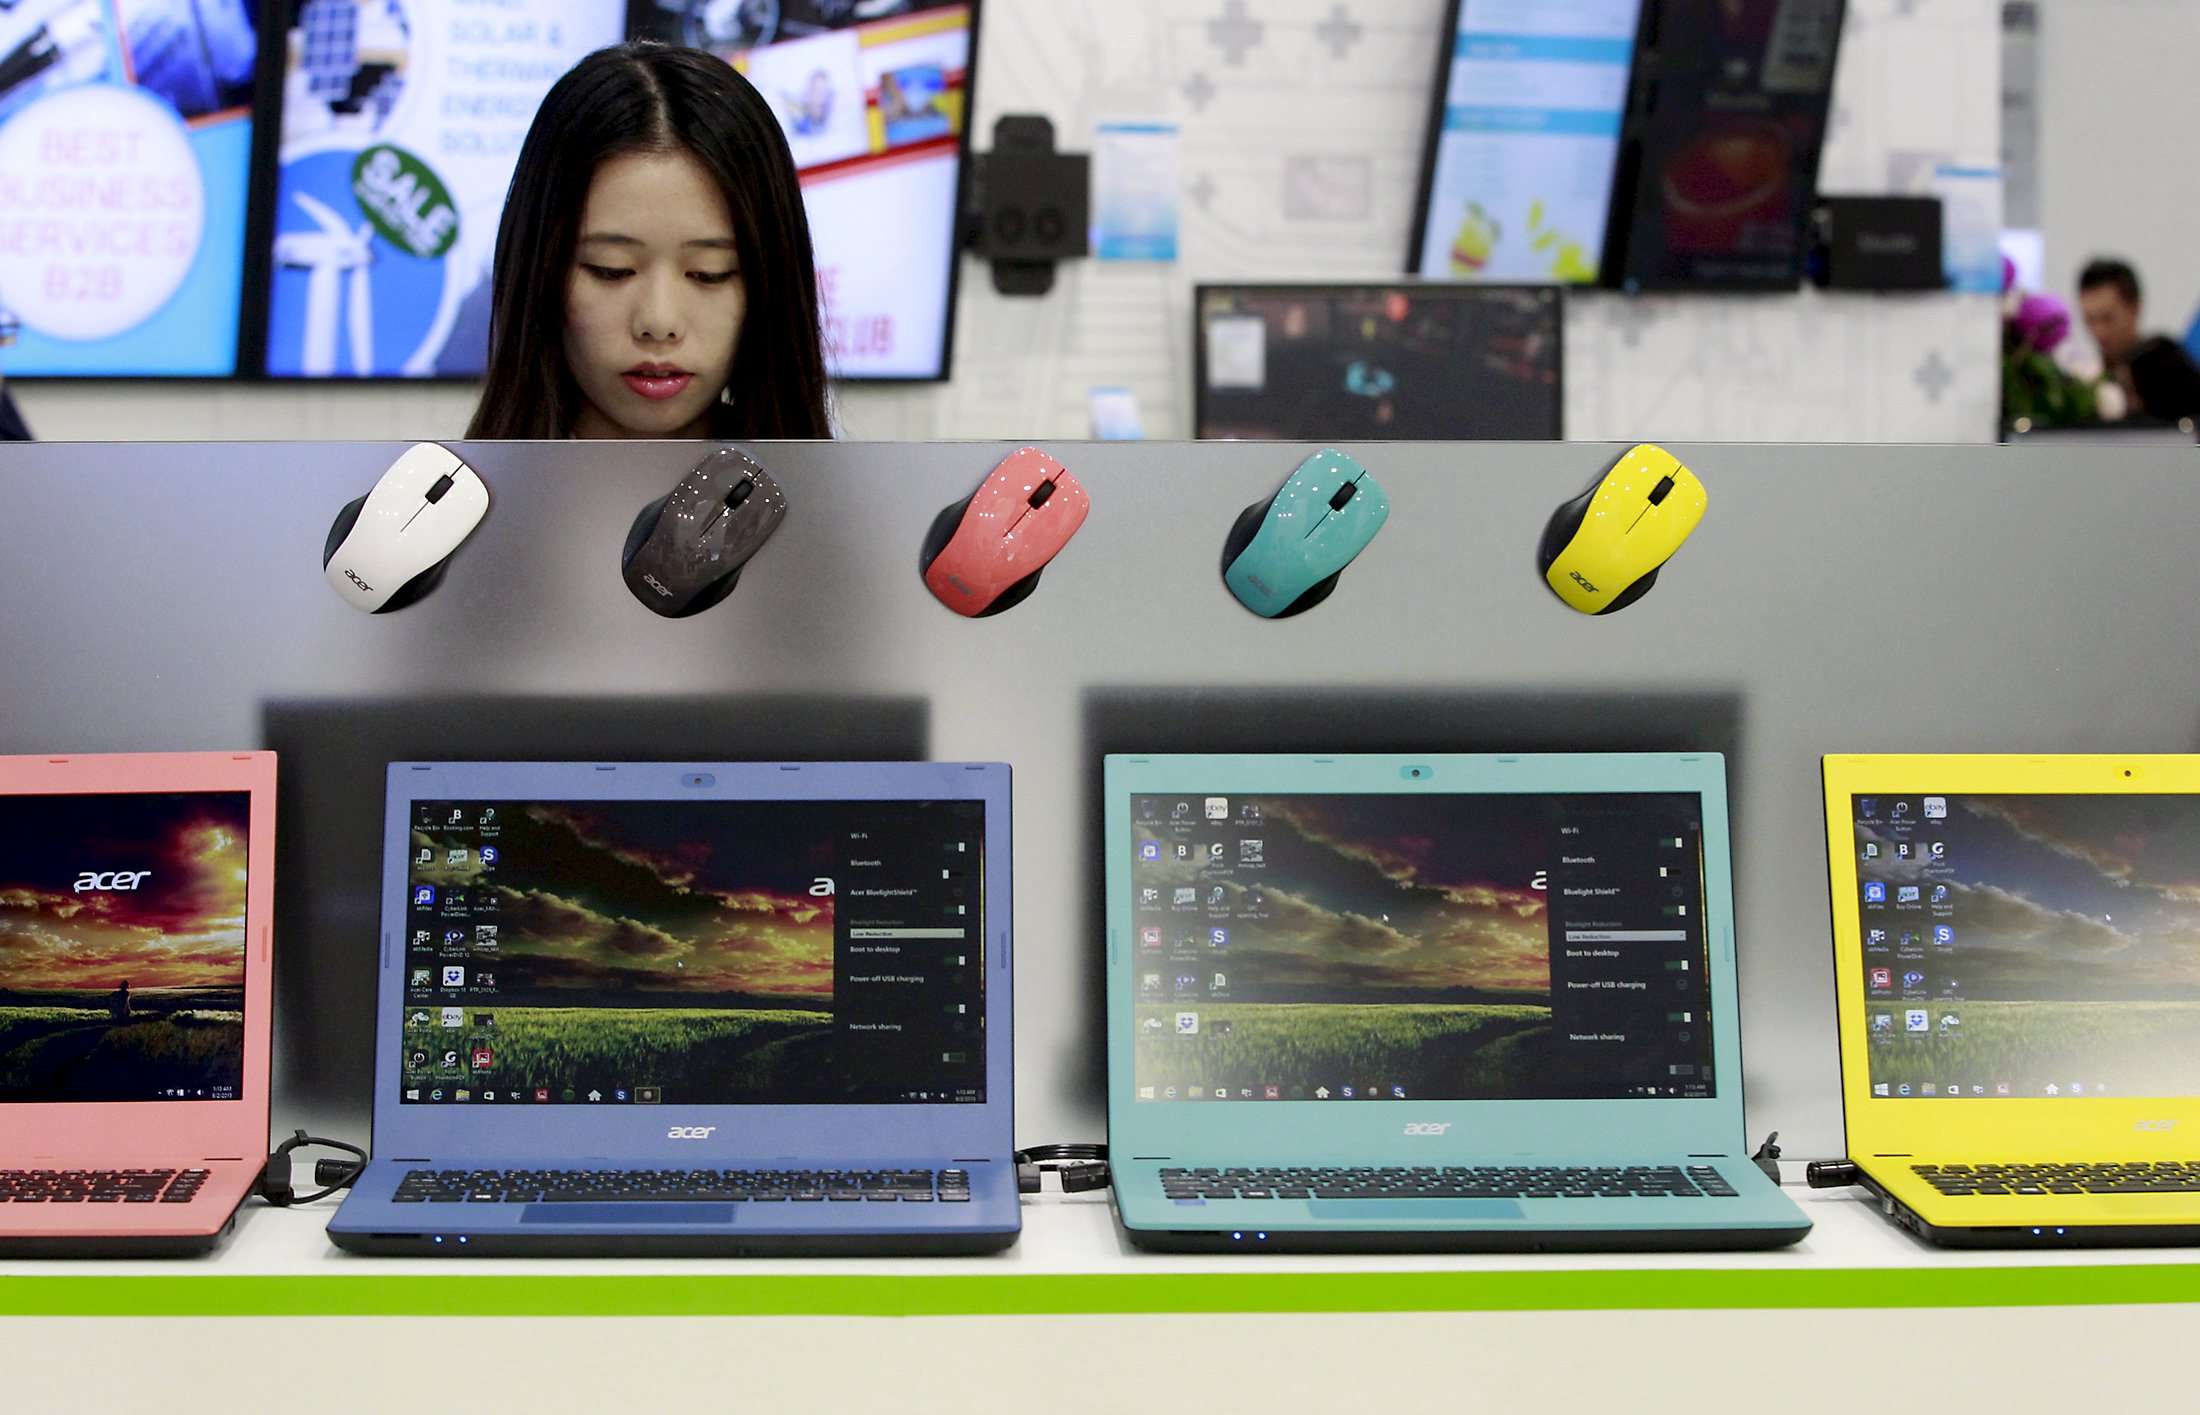 “Acer Aspire” laptops on display. The company is slowly developing its cloud computing operations, under the control of its founder Stan Shih’s son, Maverick Shih. Photo: Reuters